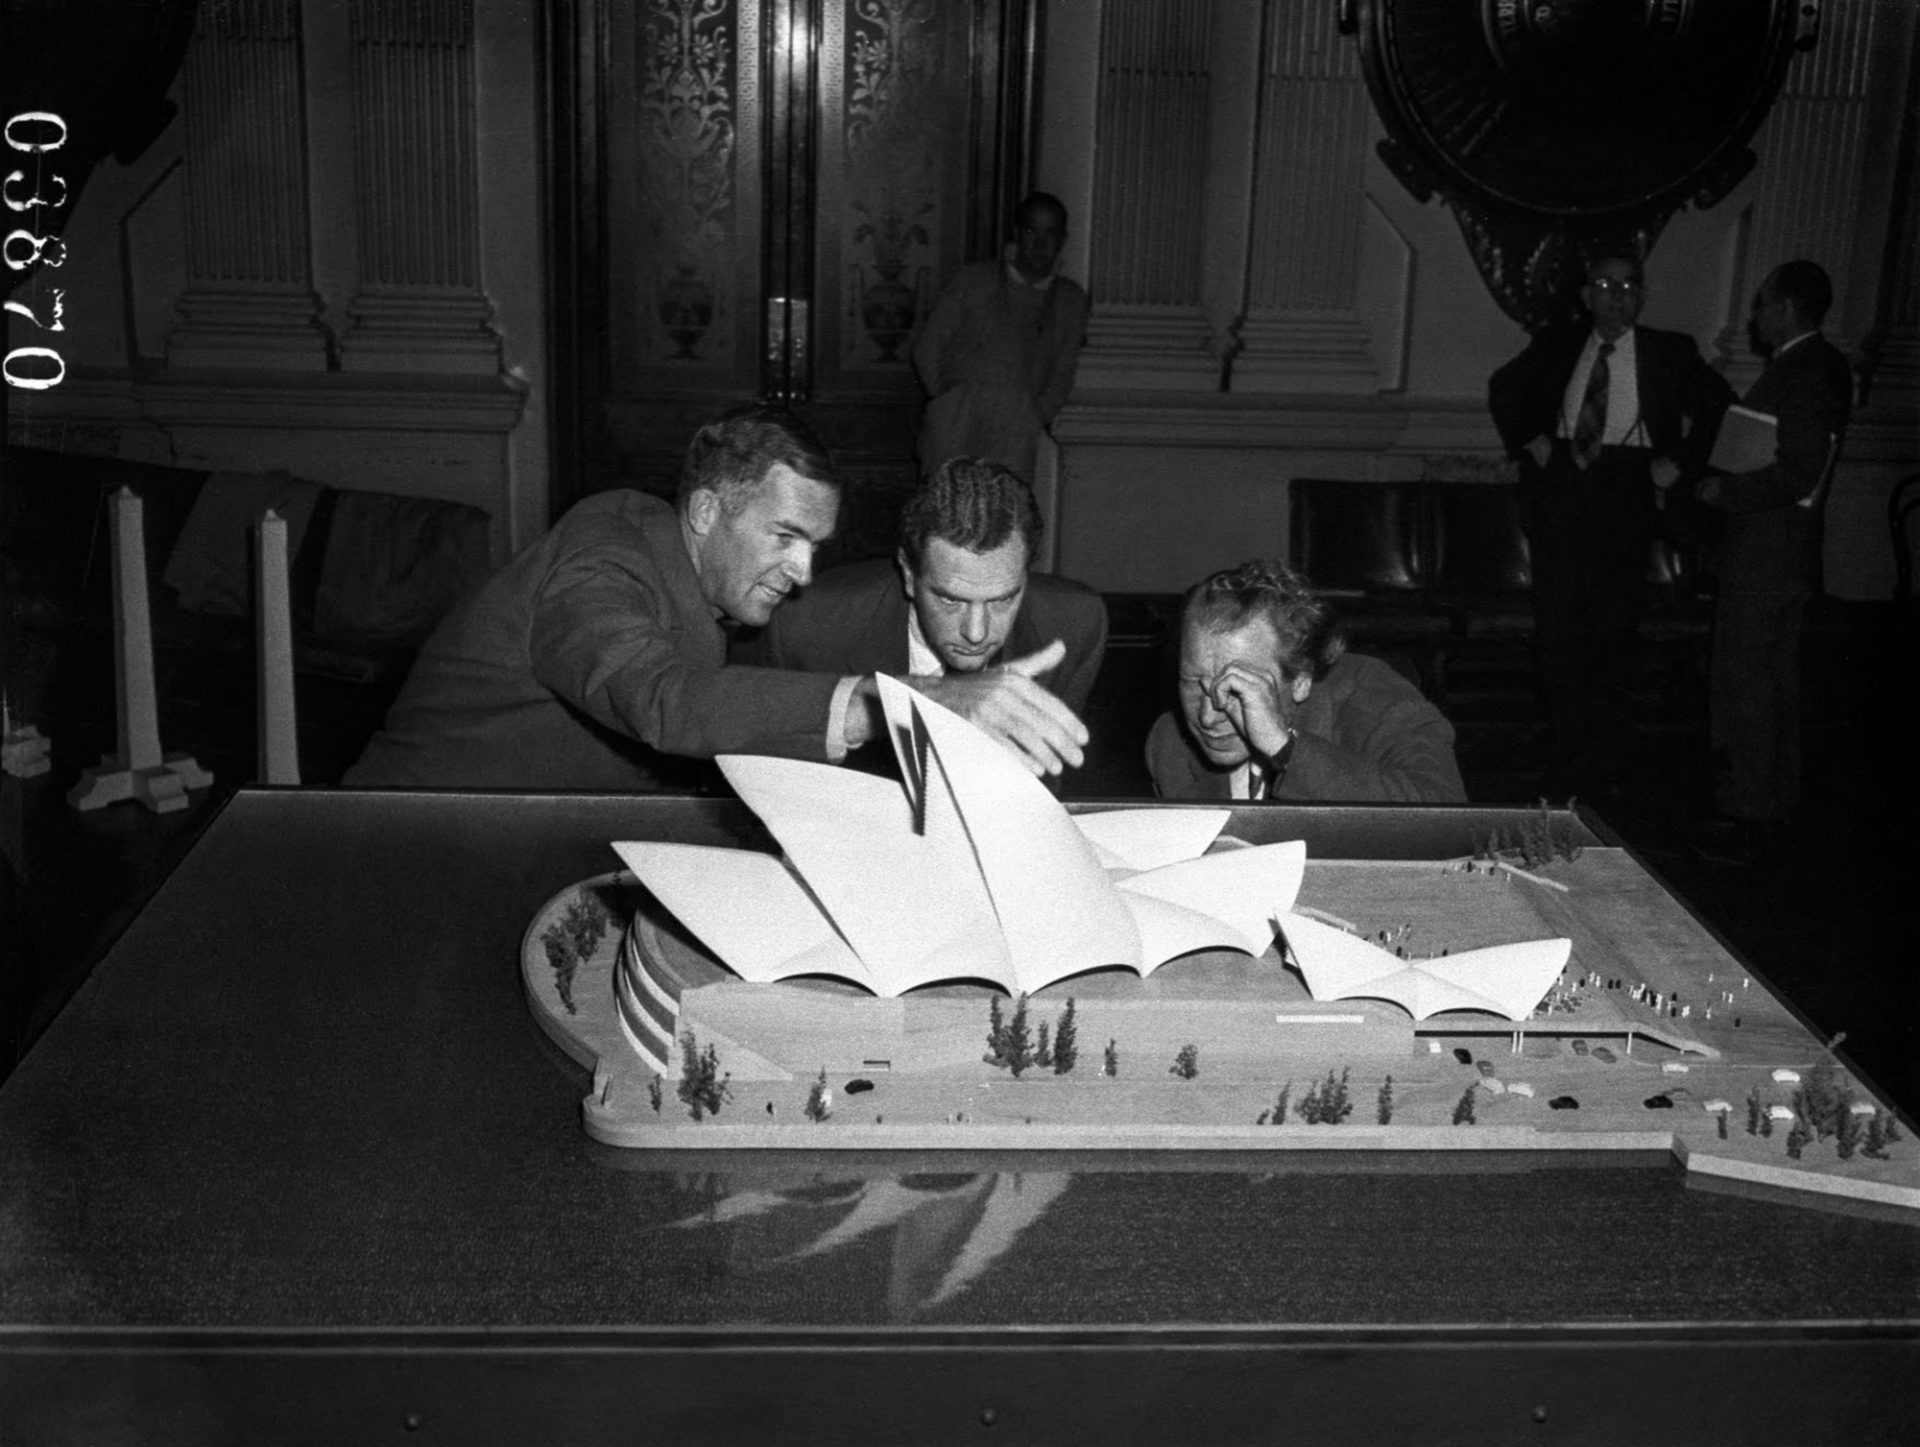 Jørn Utzon (left) presenting a model of the Opera House at Sydney Town Hall, 1957. Source: State Library of NSW, Australian Photographic Agency – 03870